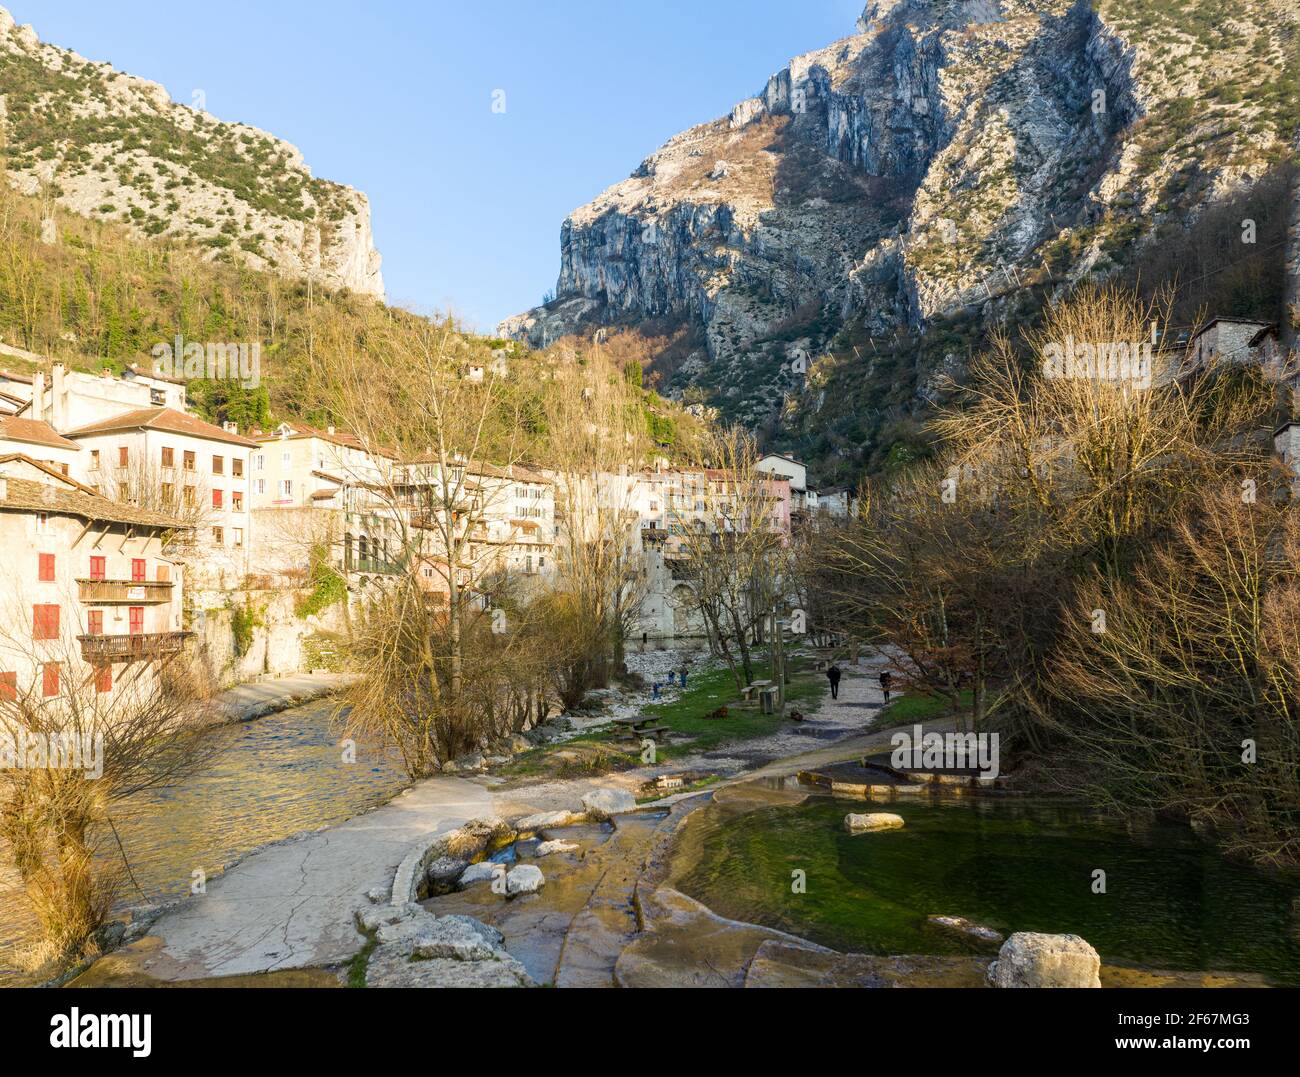 Buildings in village under steep limestone rock walls of Vercors mountains, France. Morning sunshine. Stock Photo